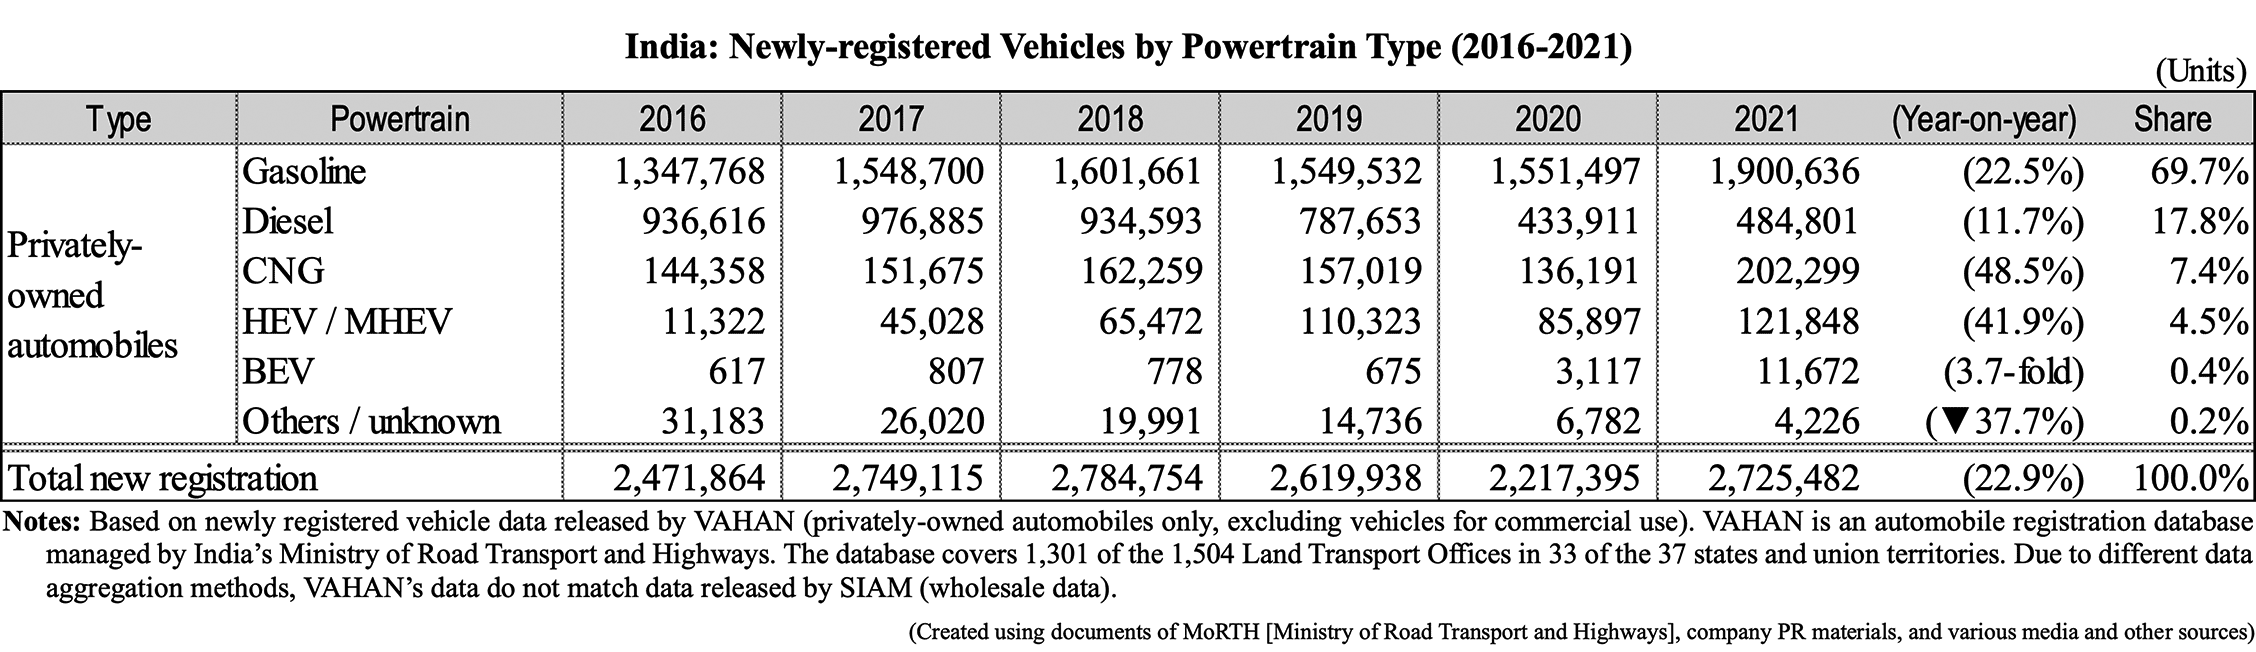 Table: India: Newly-registered Vehicles by Powertrain Type (2016-2021)